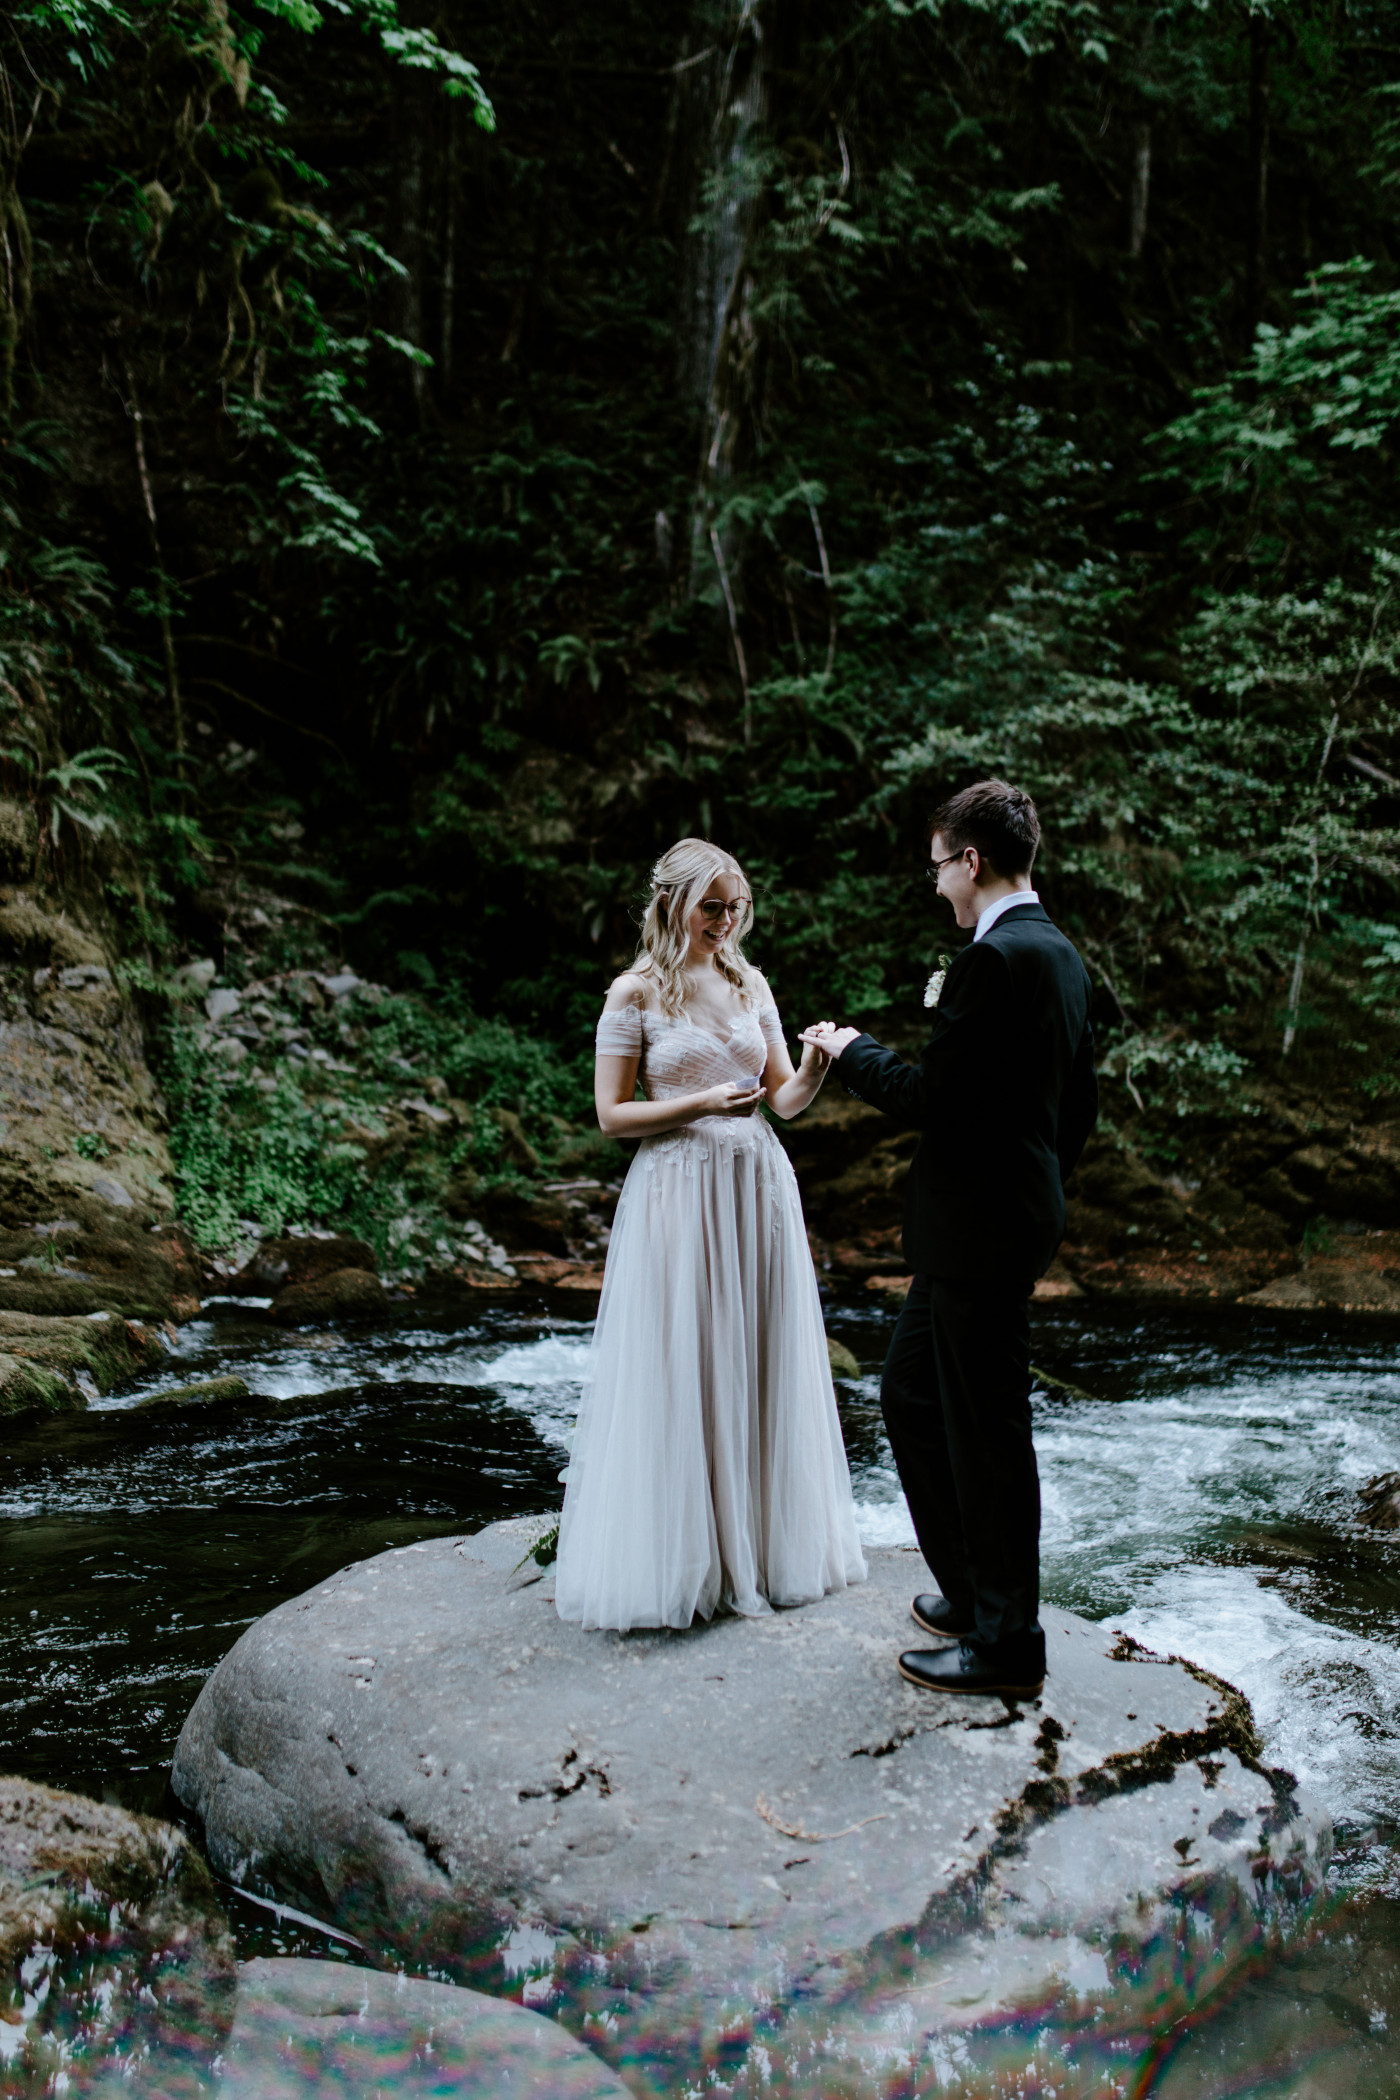 Kylie reads her vows to Corey as they stand in the middle of the river running through Mount Hood National Forest.